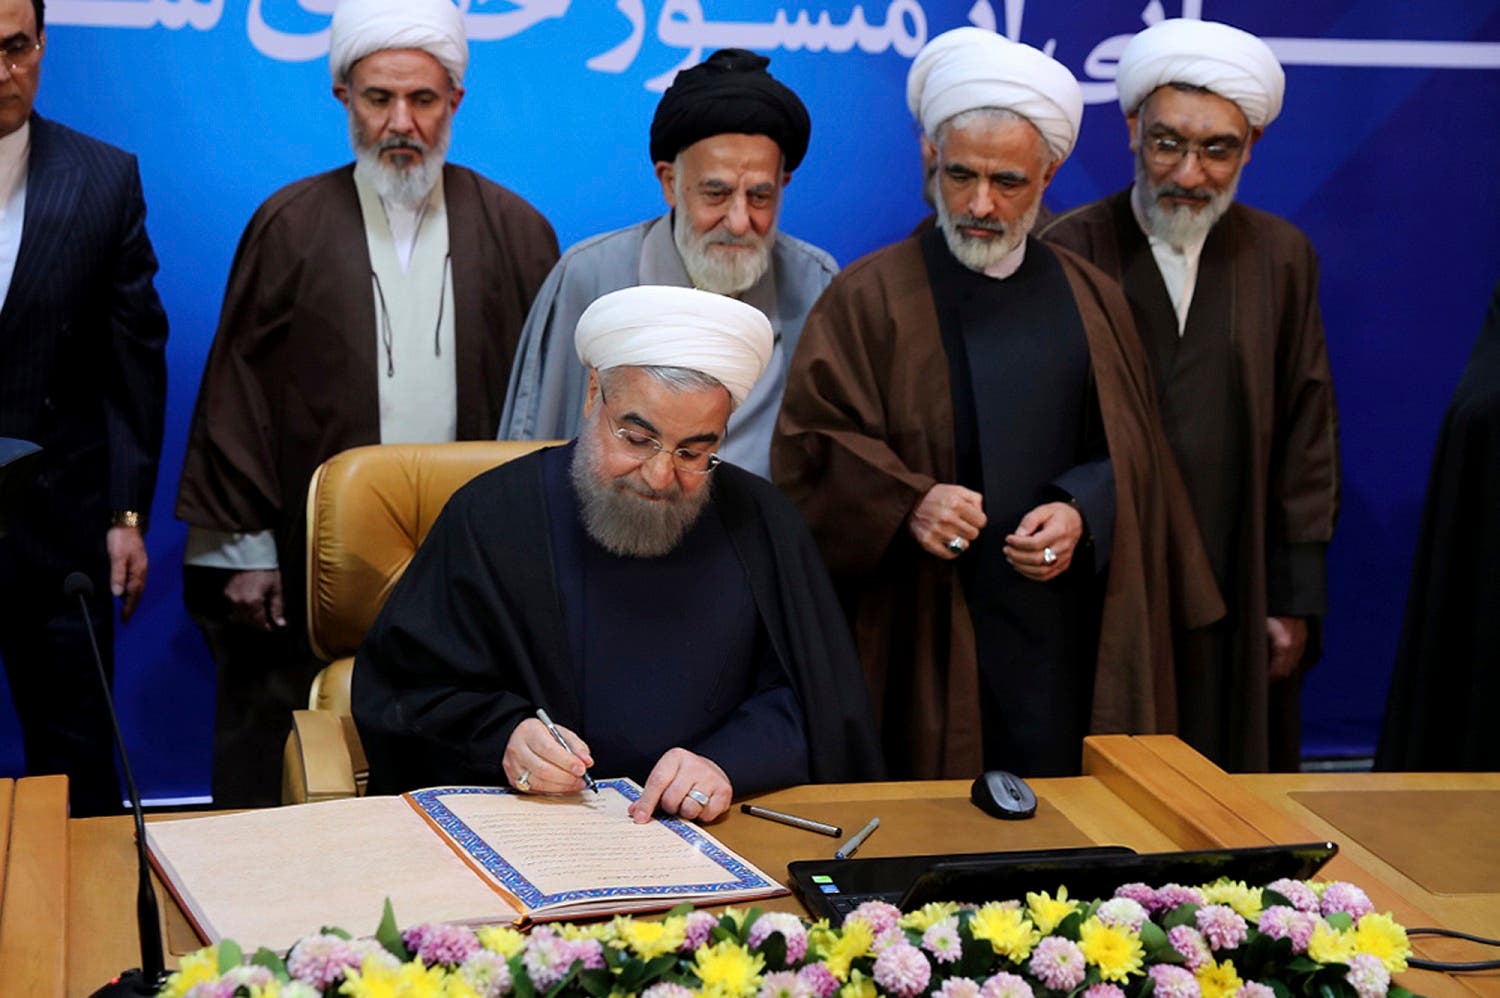 President Hassan Rouhani signs the document of Iran’s “Charter of Citizenship Rights” in Tehran on Dec. 19, 2016. (Iranian Presidency Office via AP)